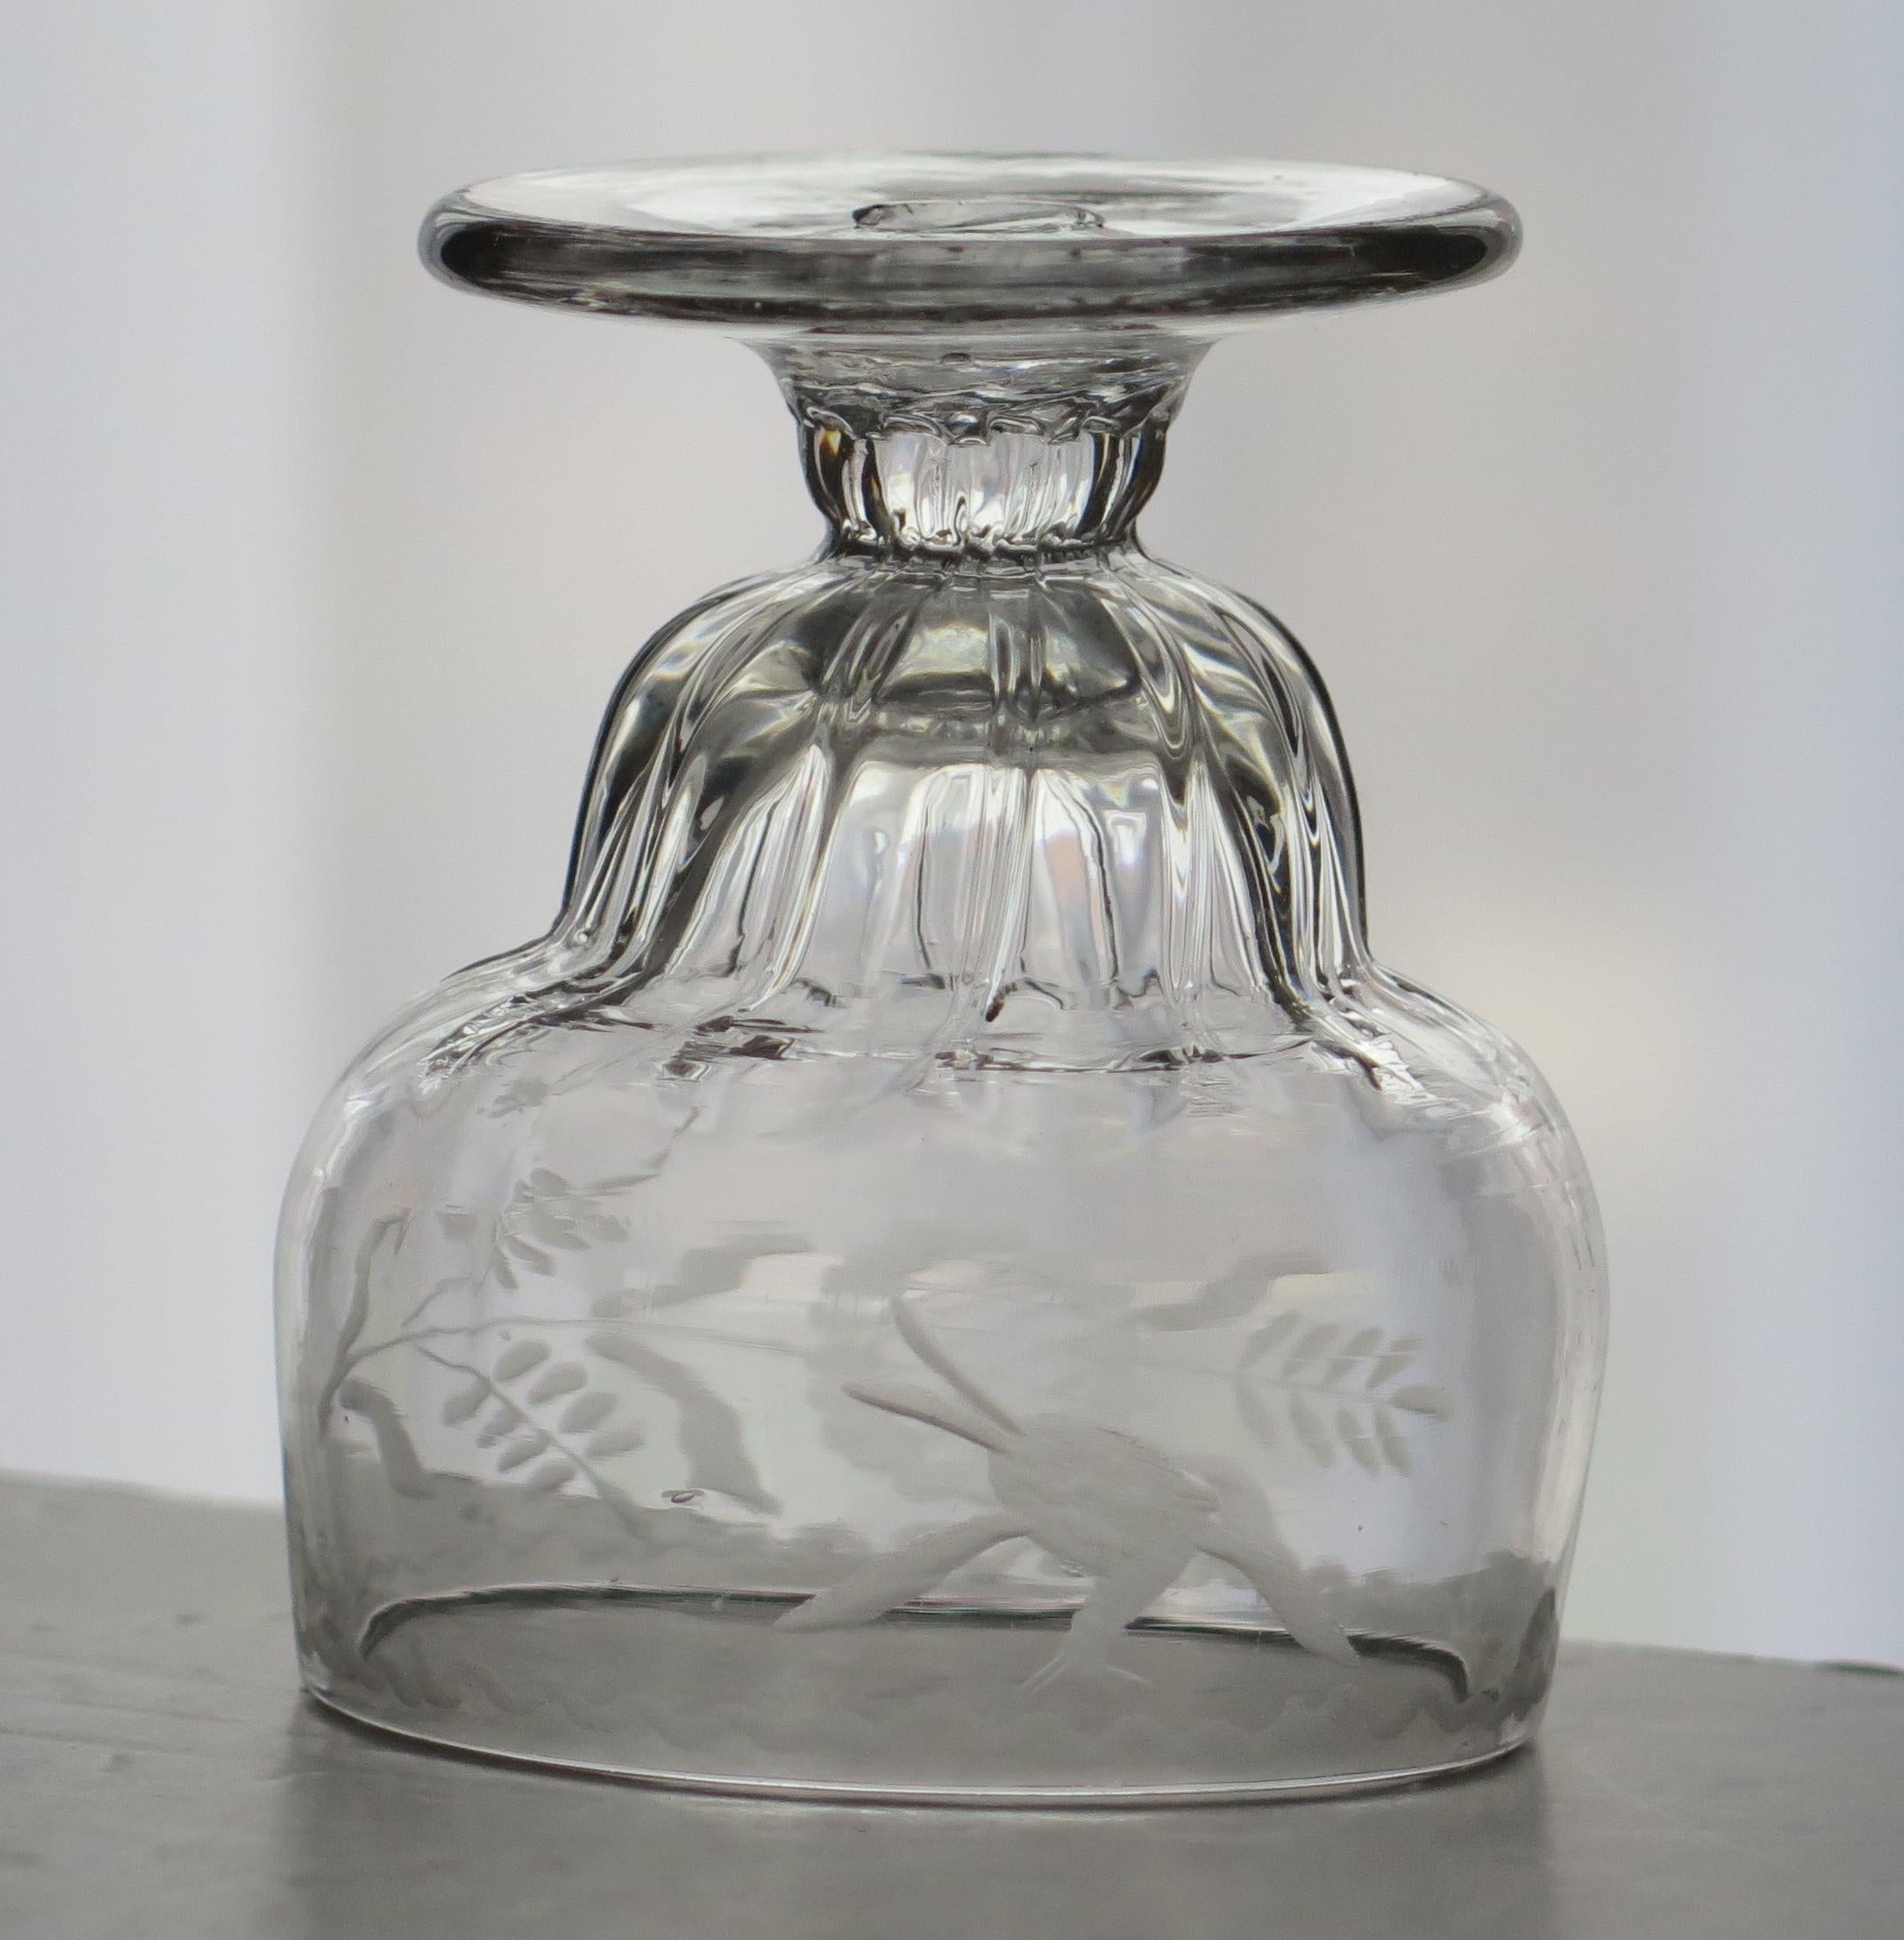 Hand-Crafted 18thC Georgian Monteith or Bonnet Glass Hand Blown & Engraved Bowl, circa 1750 For Sale